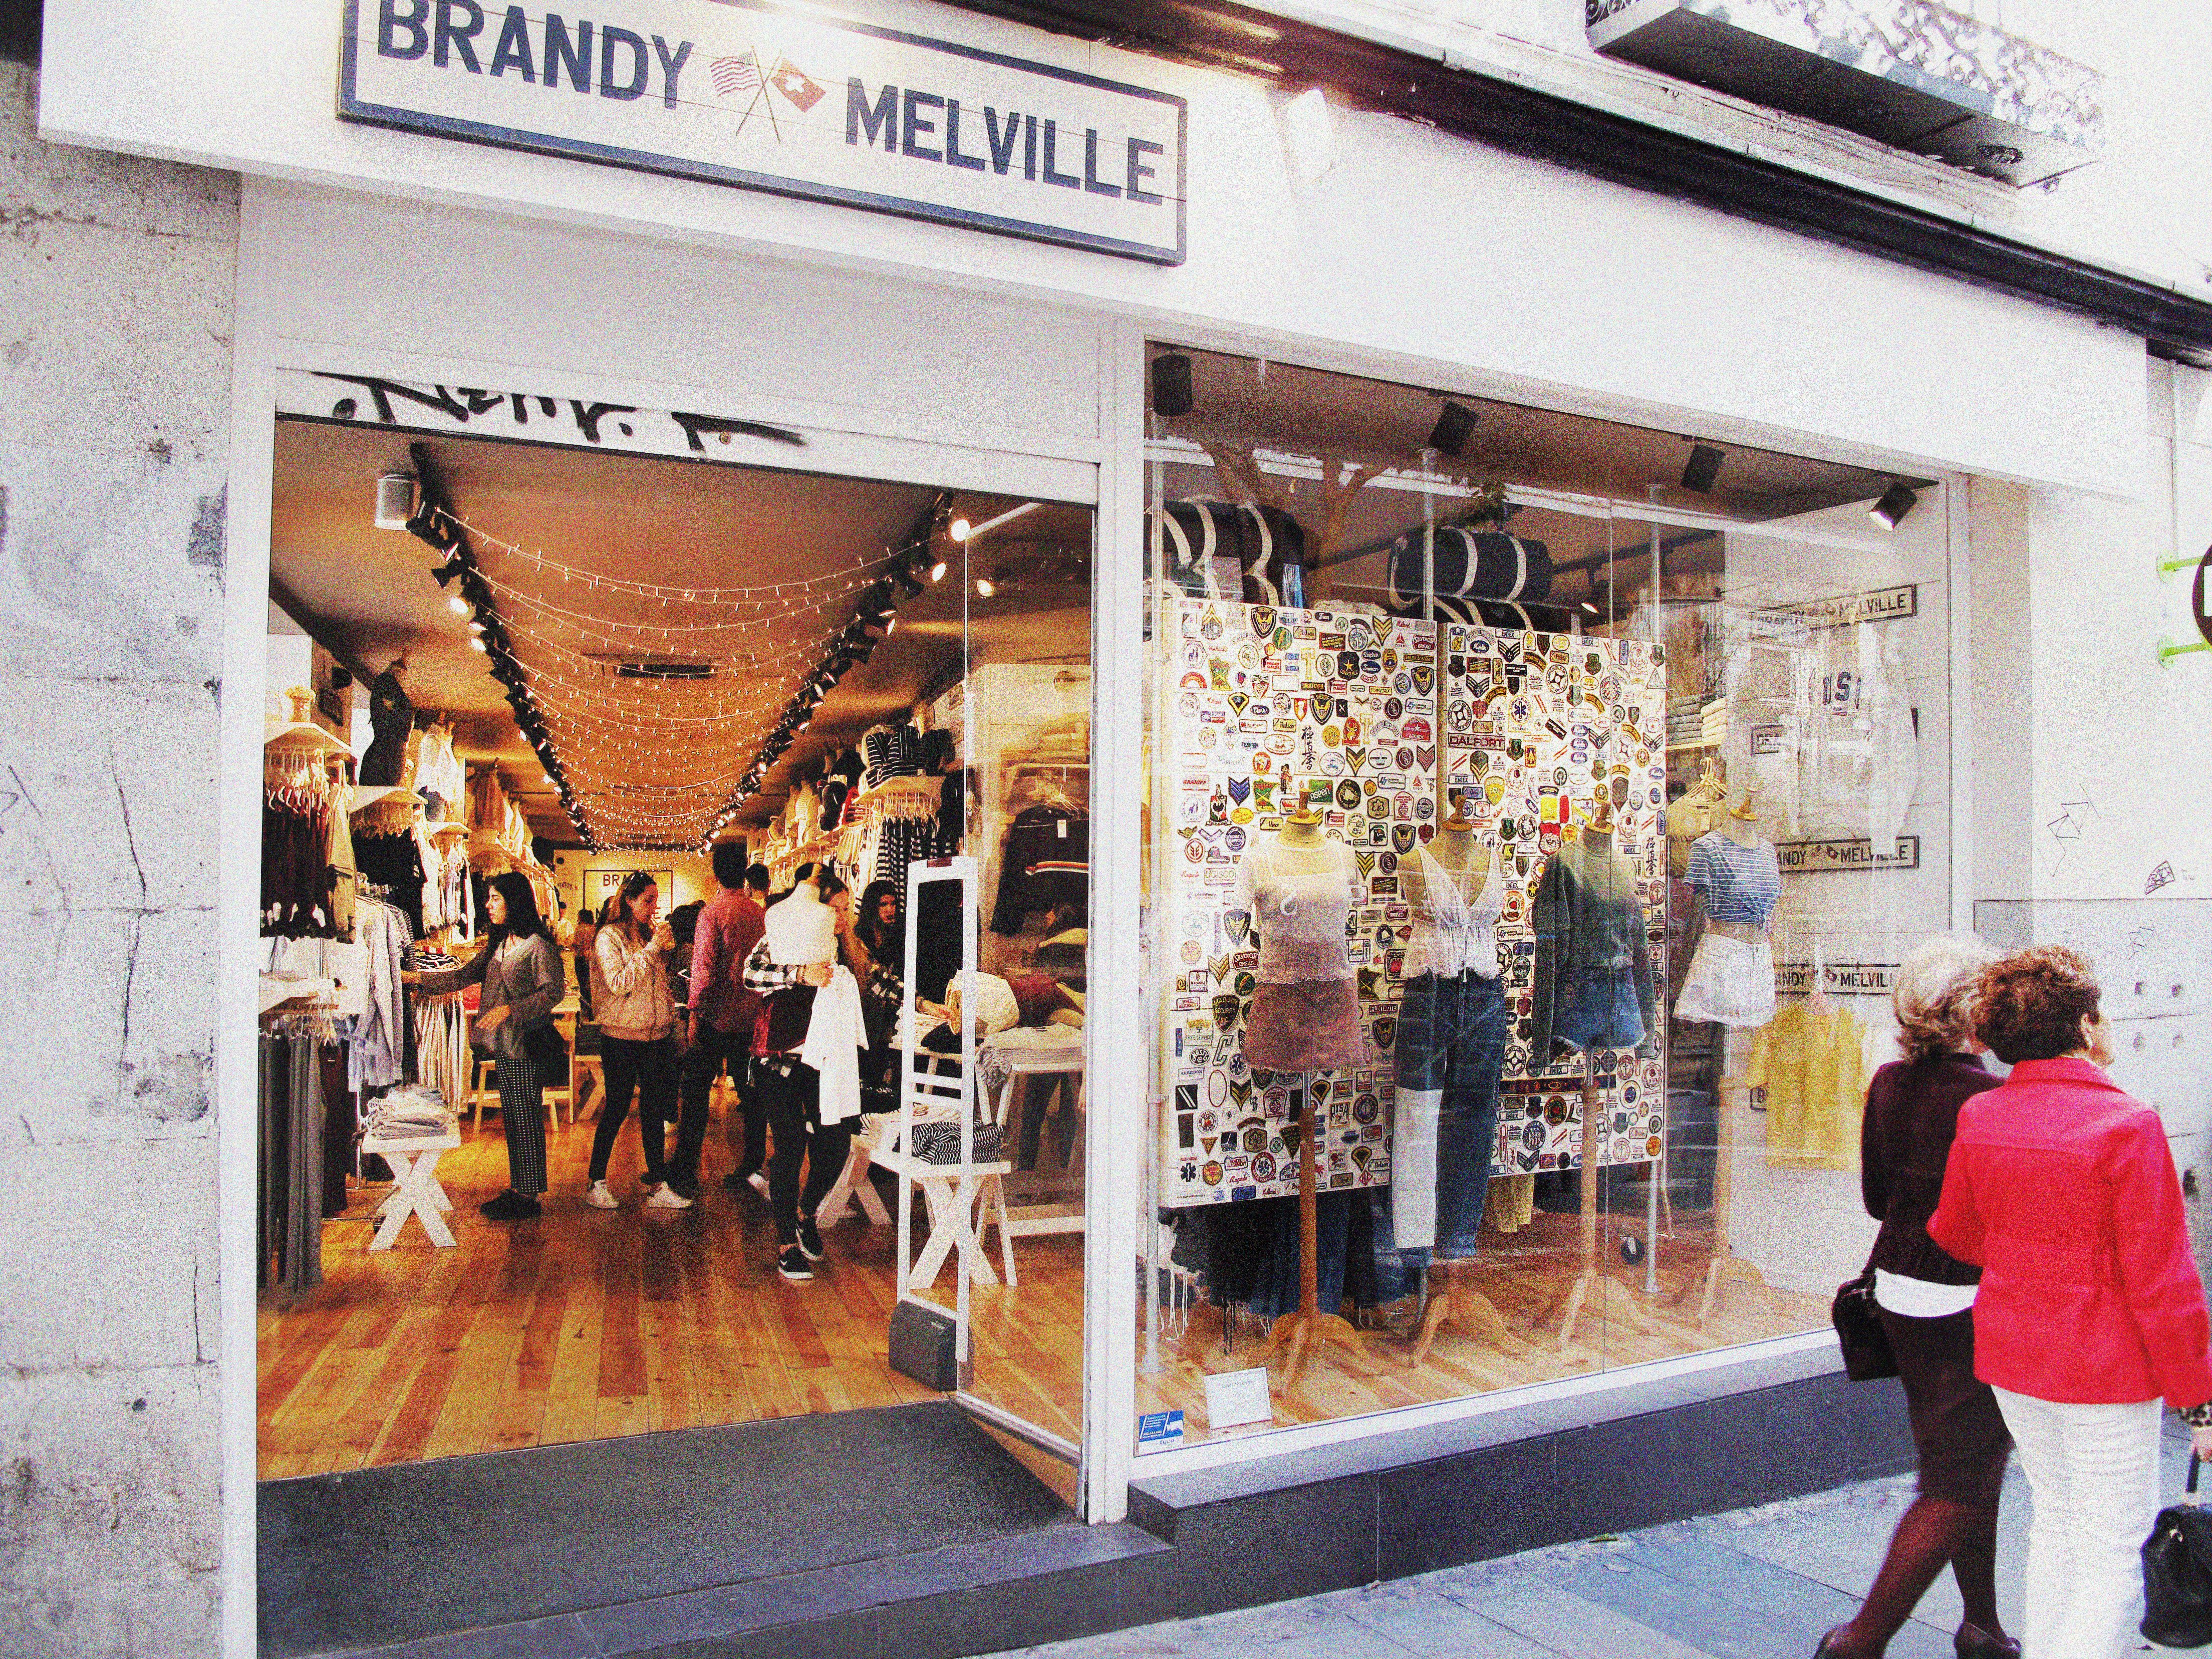 Brandy Melville CEO Doesn't Want Black Shoppers: Ex-Store Owner